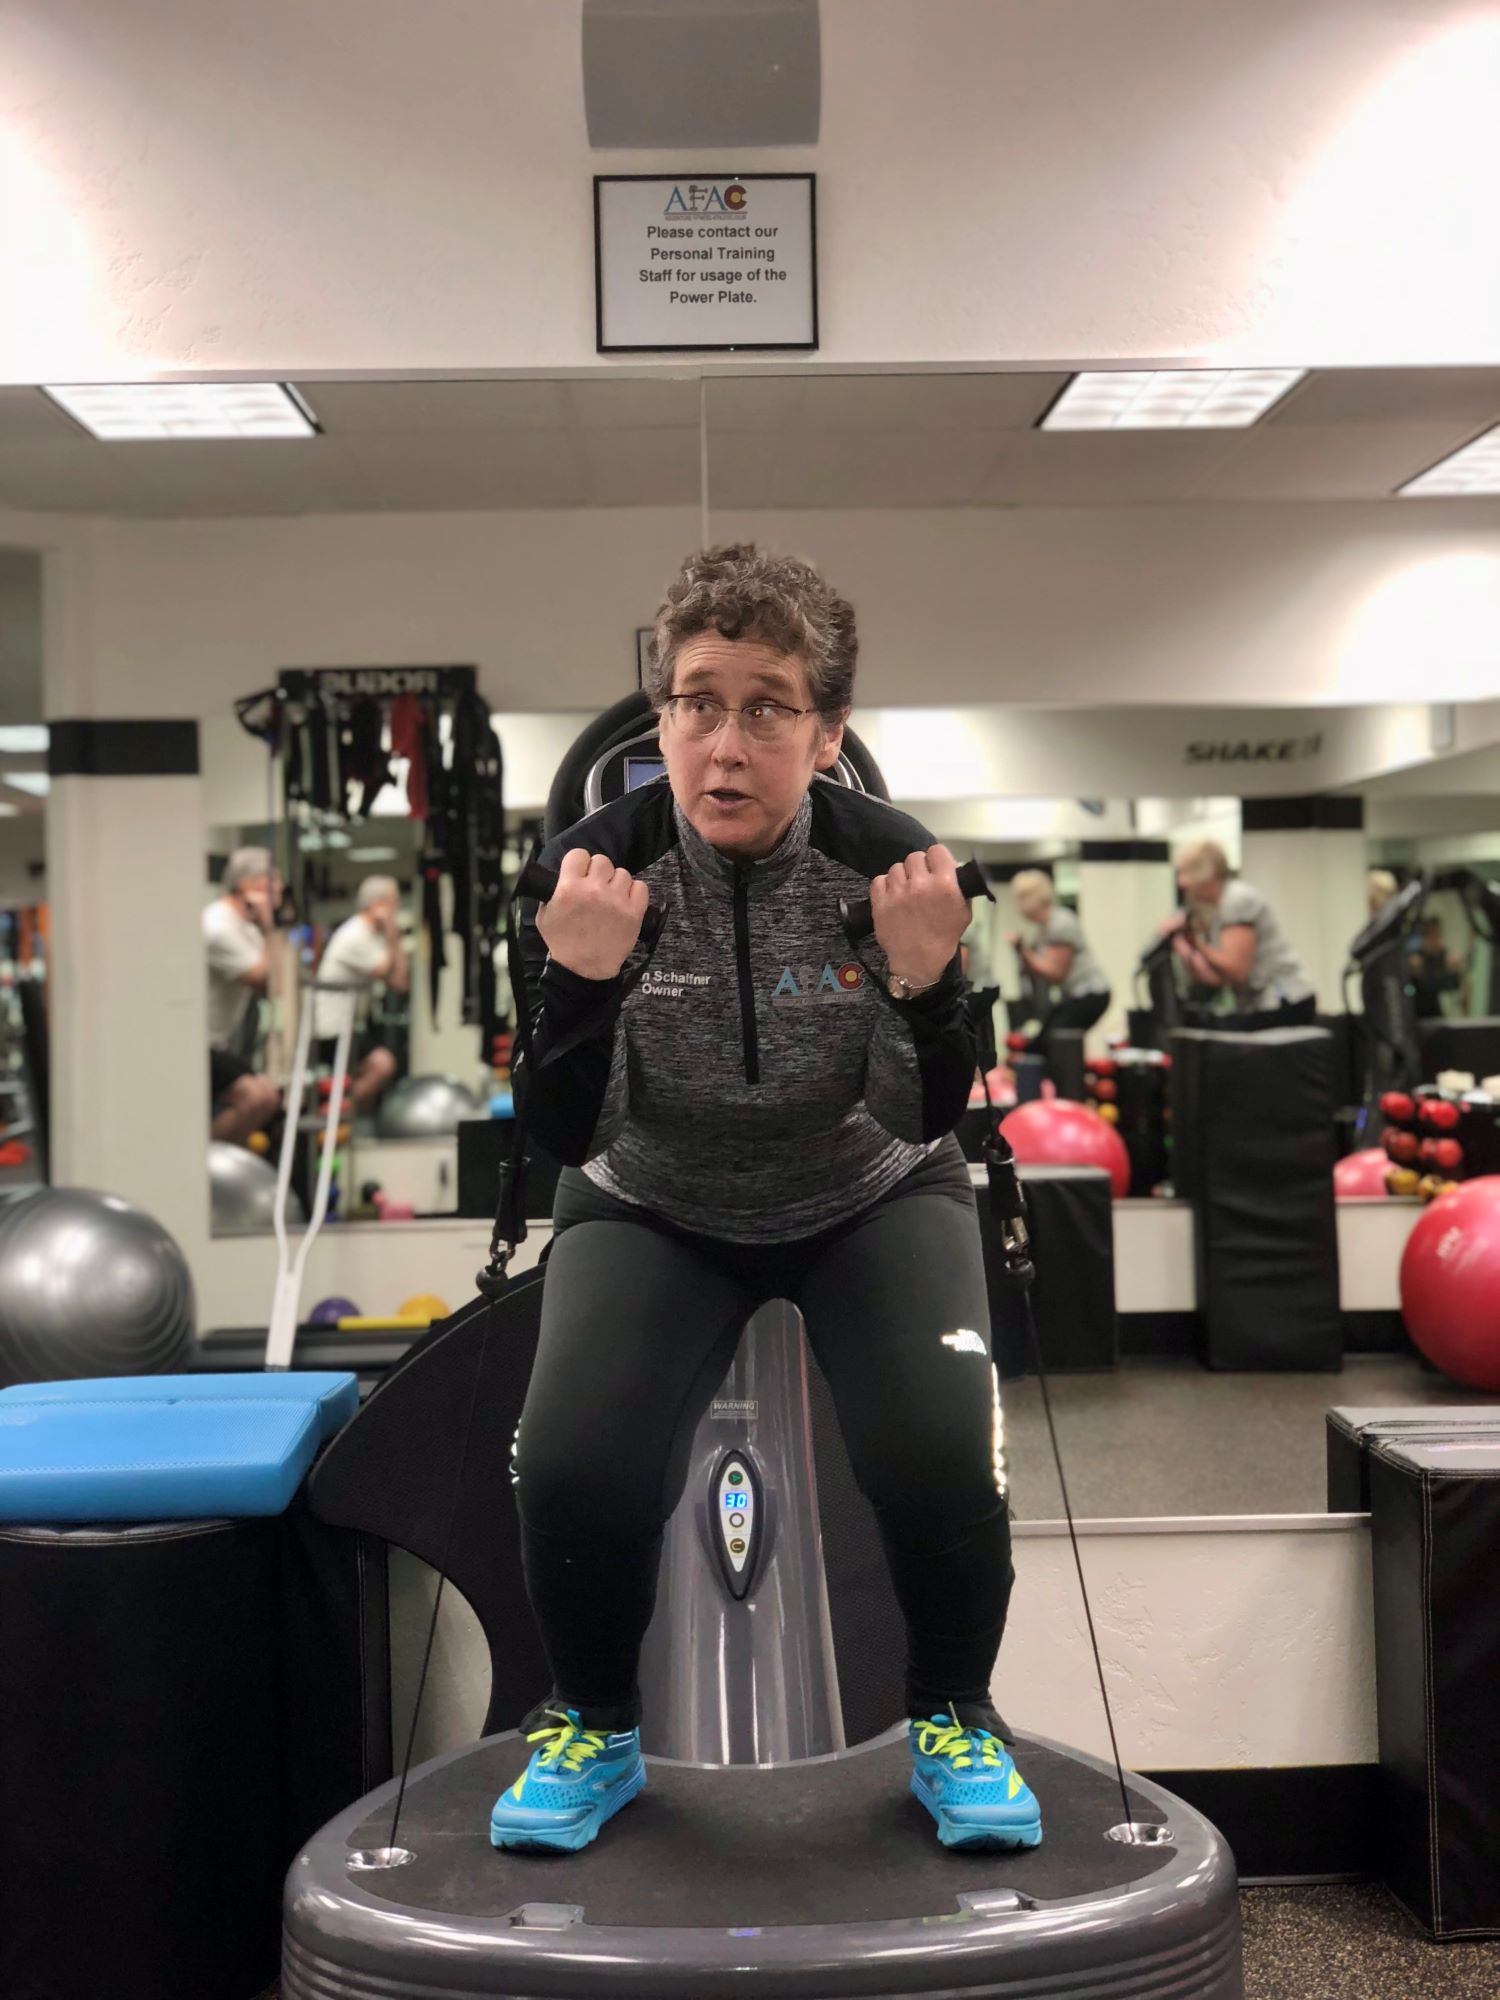 Susan Schaffner, owner of AFAC gym, squats on a Power Plate while holding small dumbbells